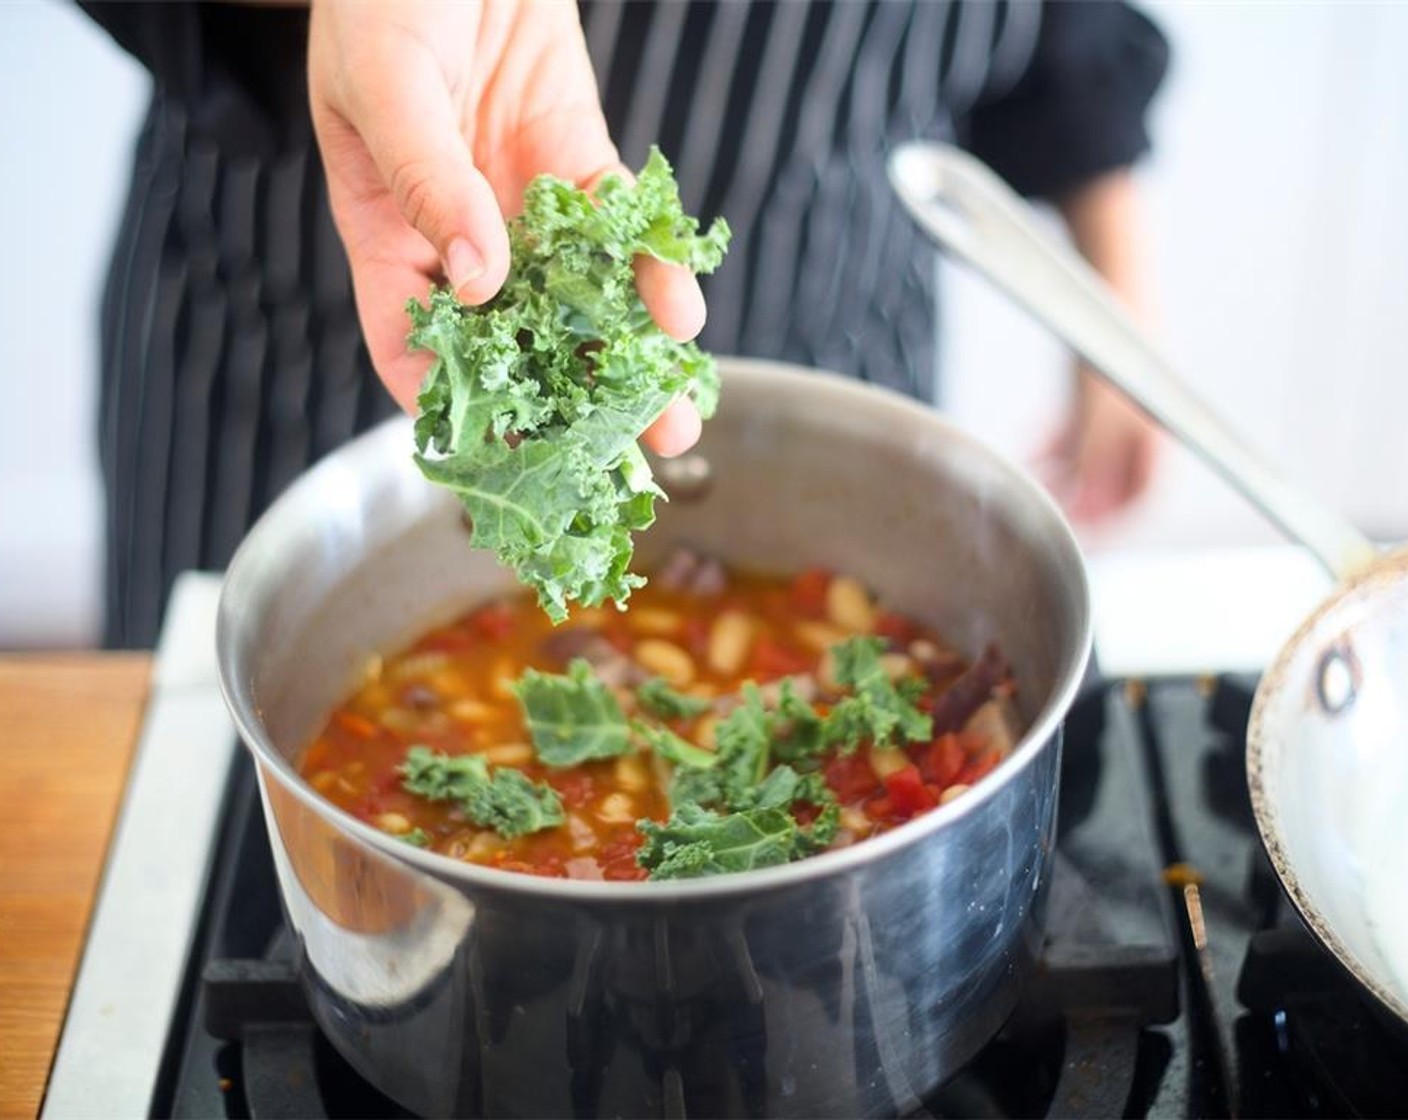 step 16 Drain Tomatoes (1 1/2 cups) and discard liquid. Stir Kale (3 1/3 cups) and diced tomatoes into stew, bringing to a boil, then reduce heat to simmer and cook for 5 minutes.